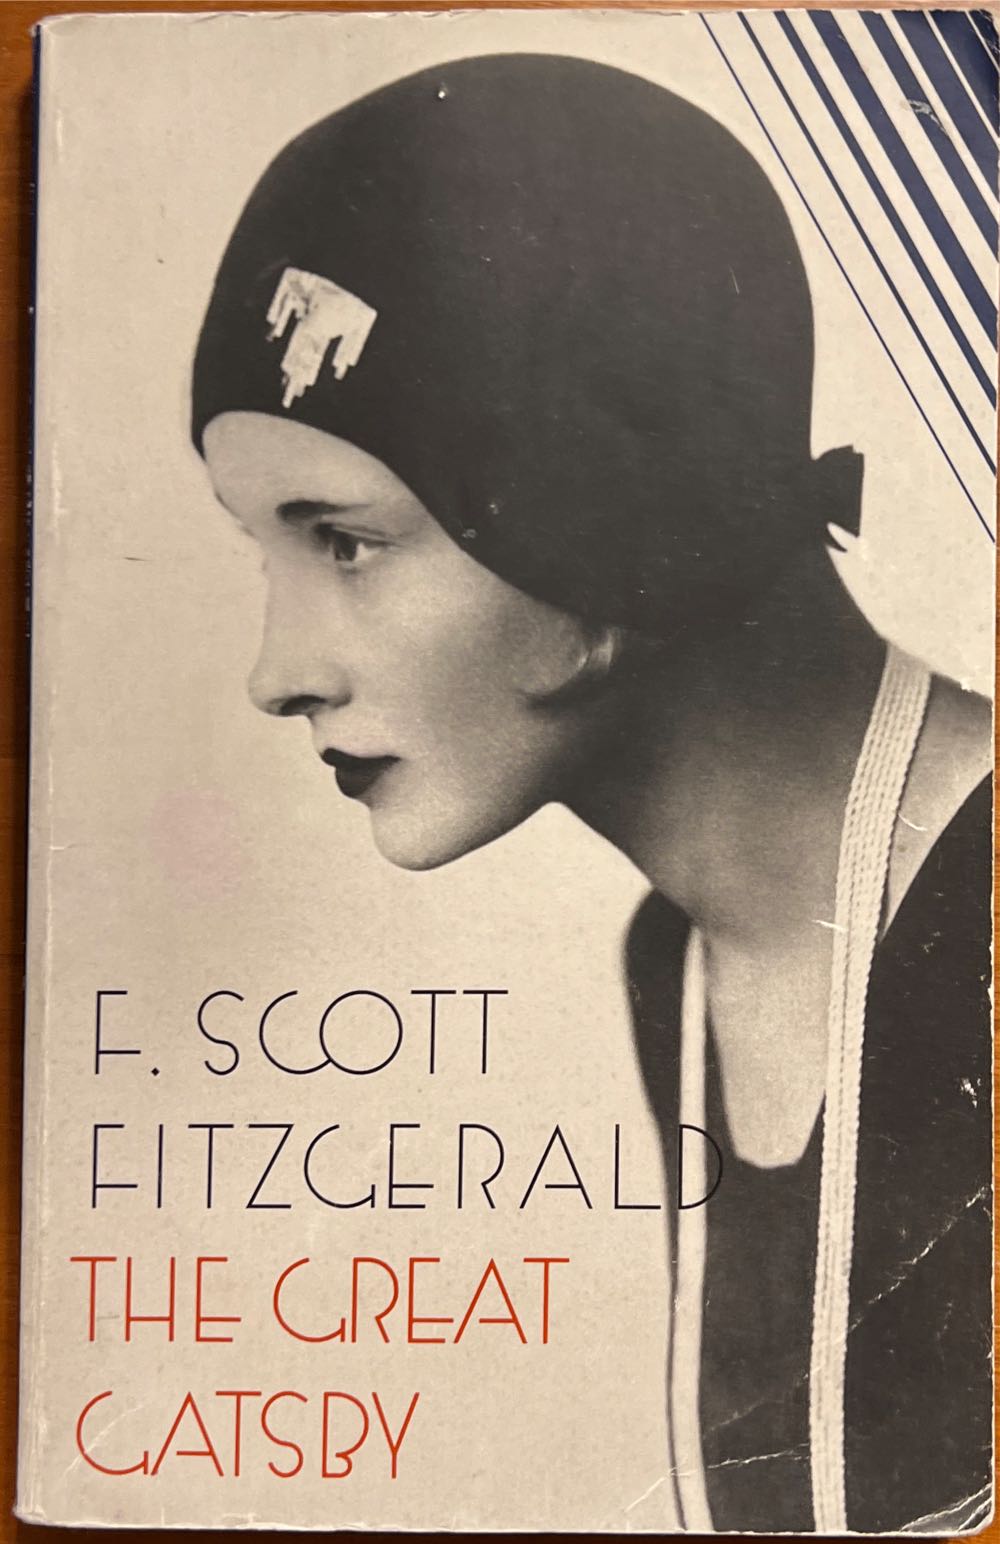 The Great Gatsby - F. Scott Fitzgerald (Charles Scribner - Trade Paperback) book collectible [Barcode 9780743273565] - Main Image 4